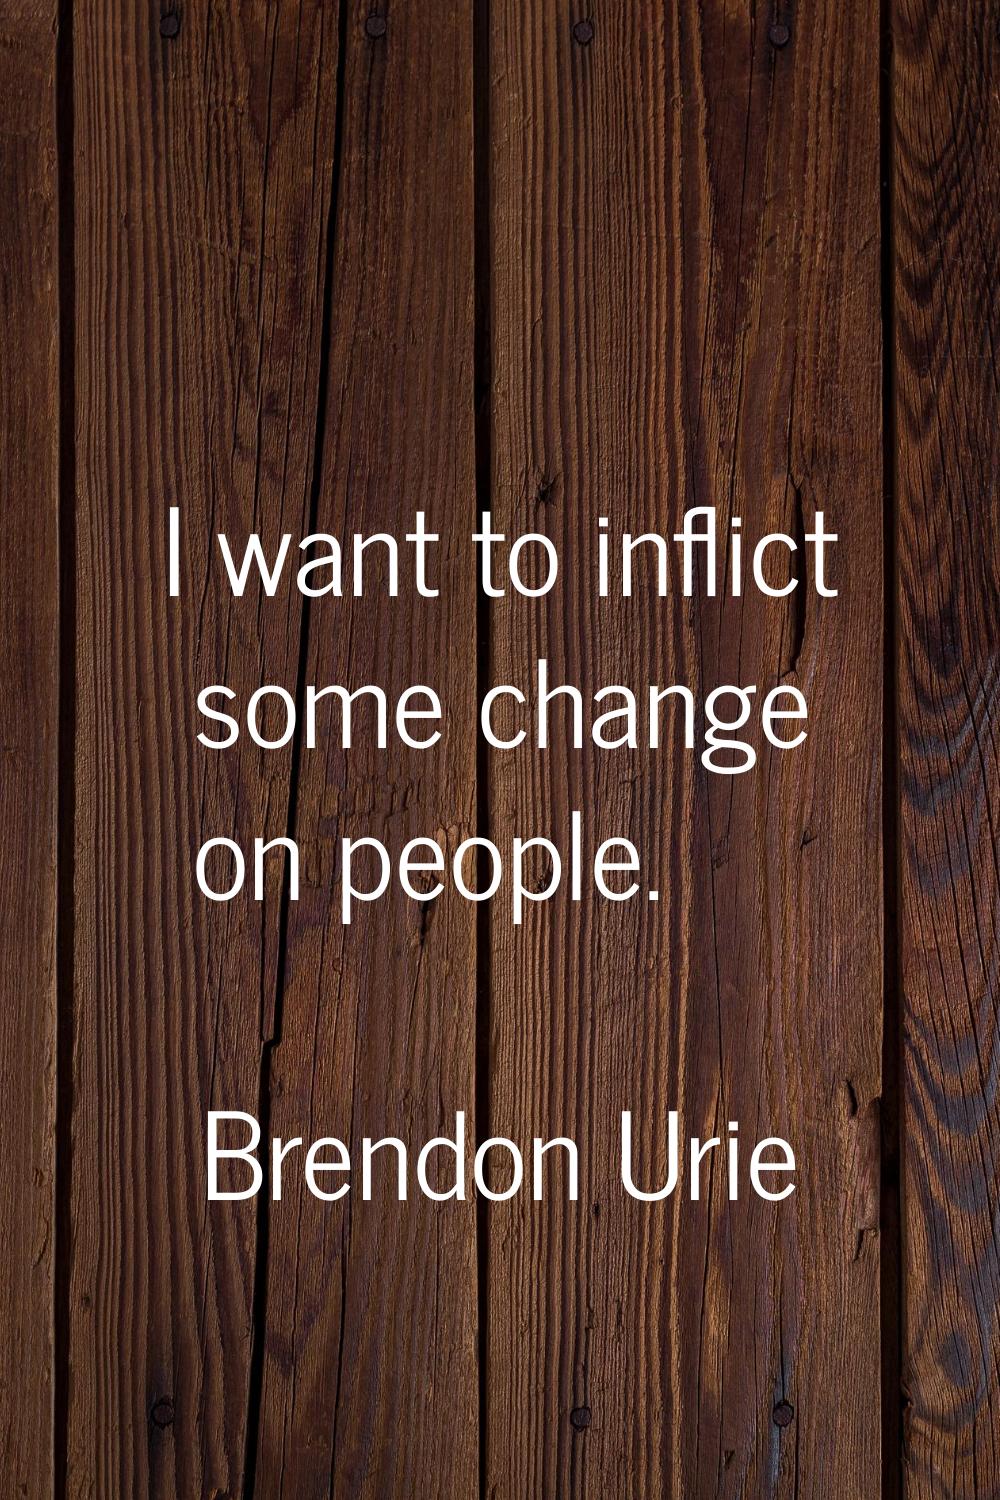 I want to inflict some change on people.